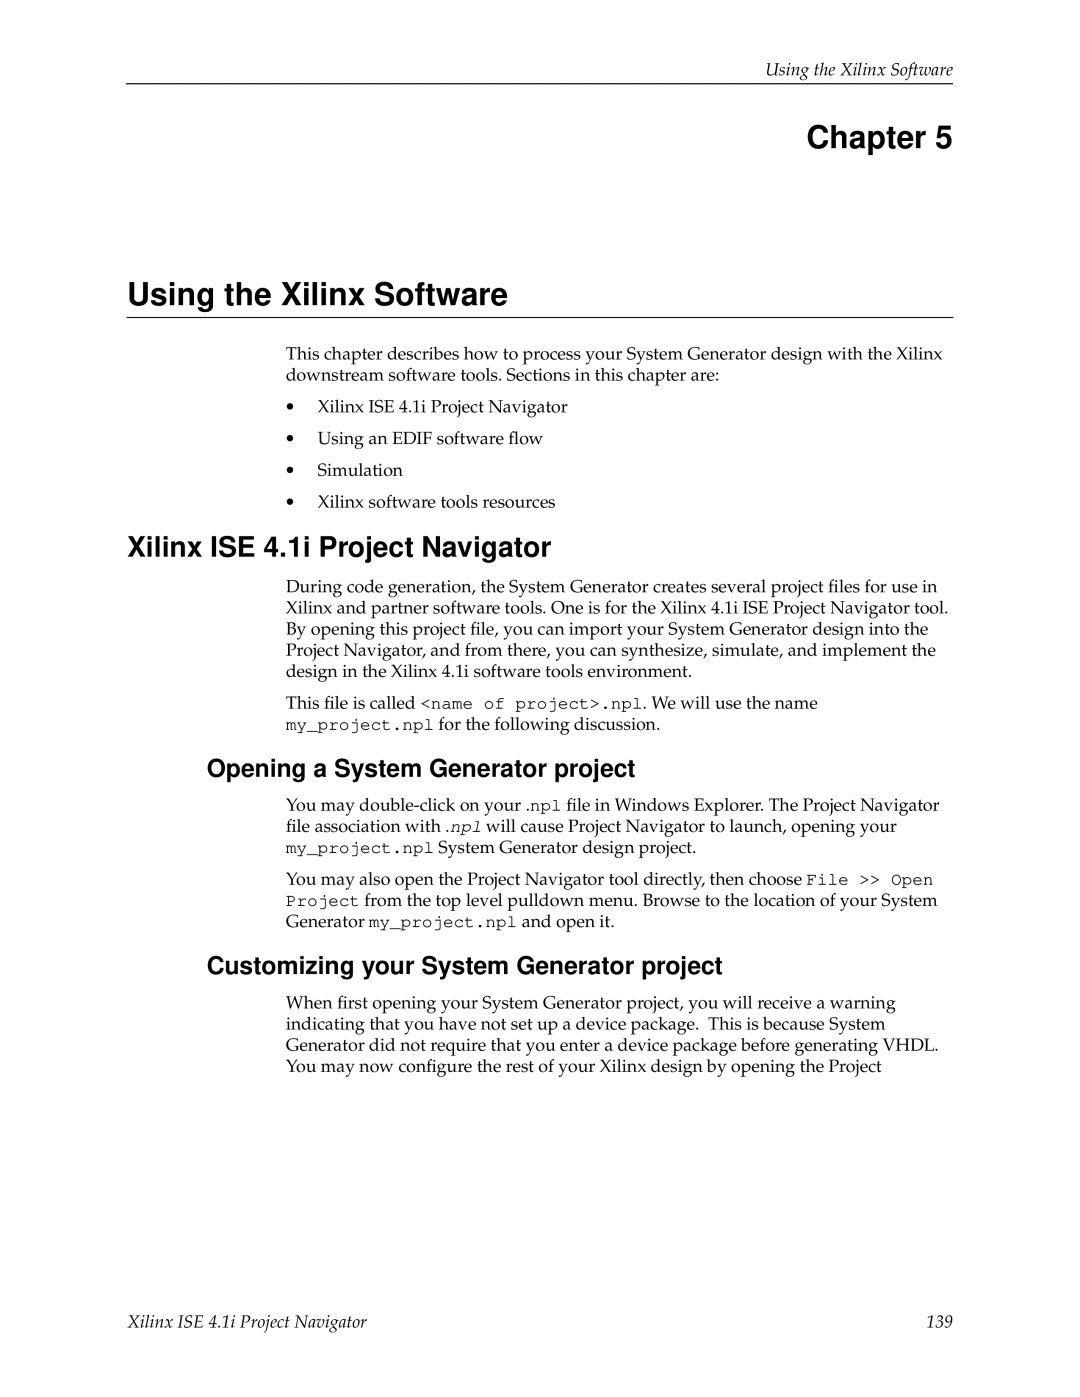 Xilinx V2.1 manual Chapter Using the Xilinx Software, Xilinx ISE 4.1i Project Navigator, Opening a System Generator project 